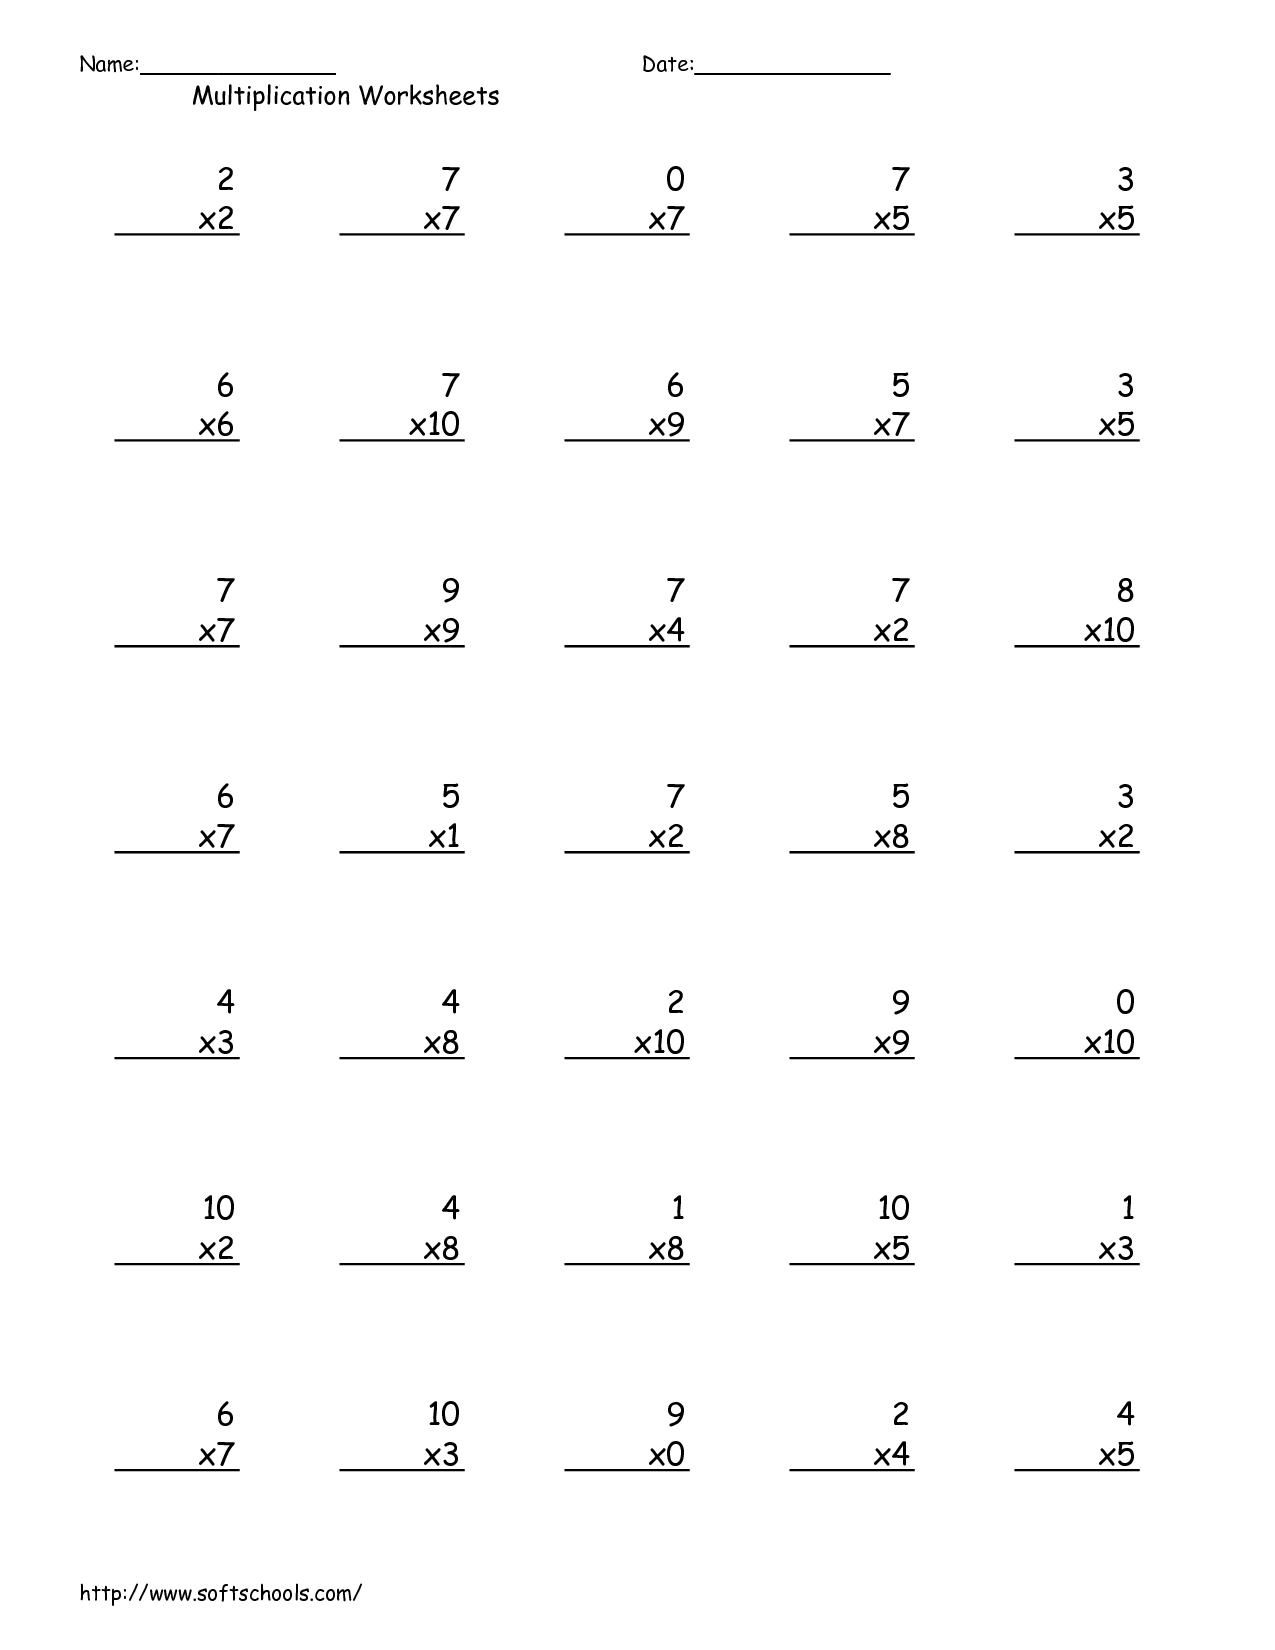 Worksheet X2 | Printable Worksheets And Activities For with regard to Multiplication Worksheets X2 X5 X10